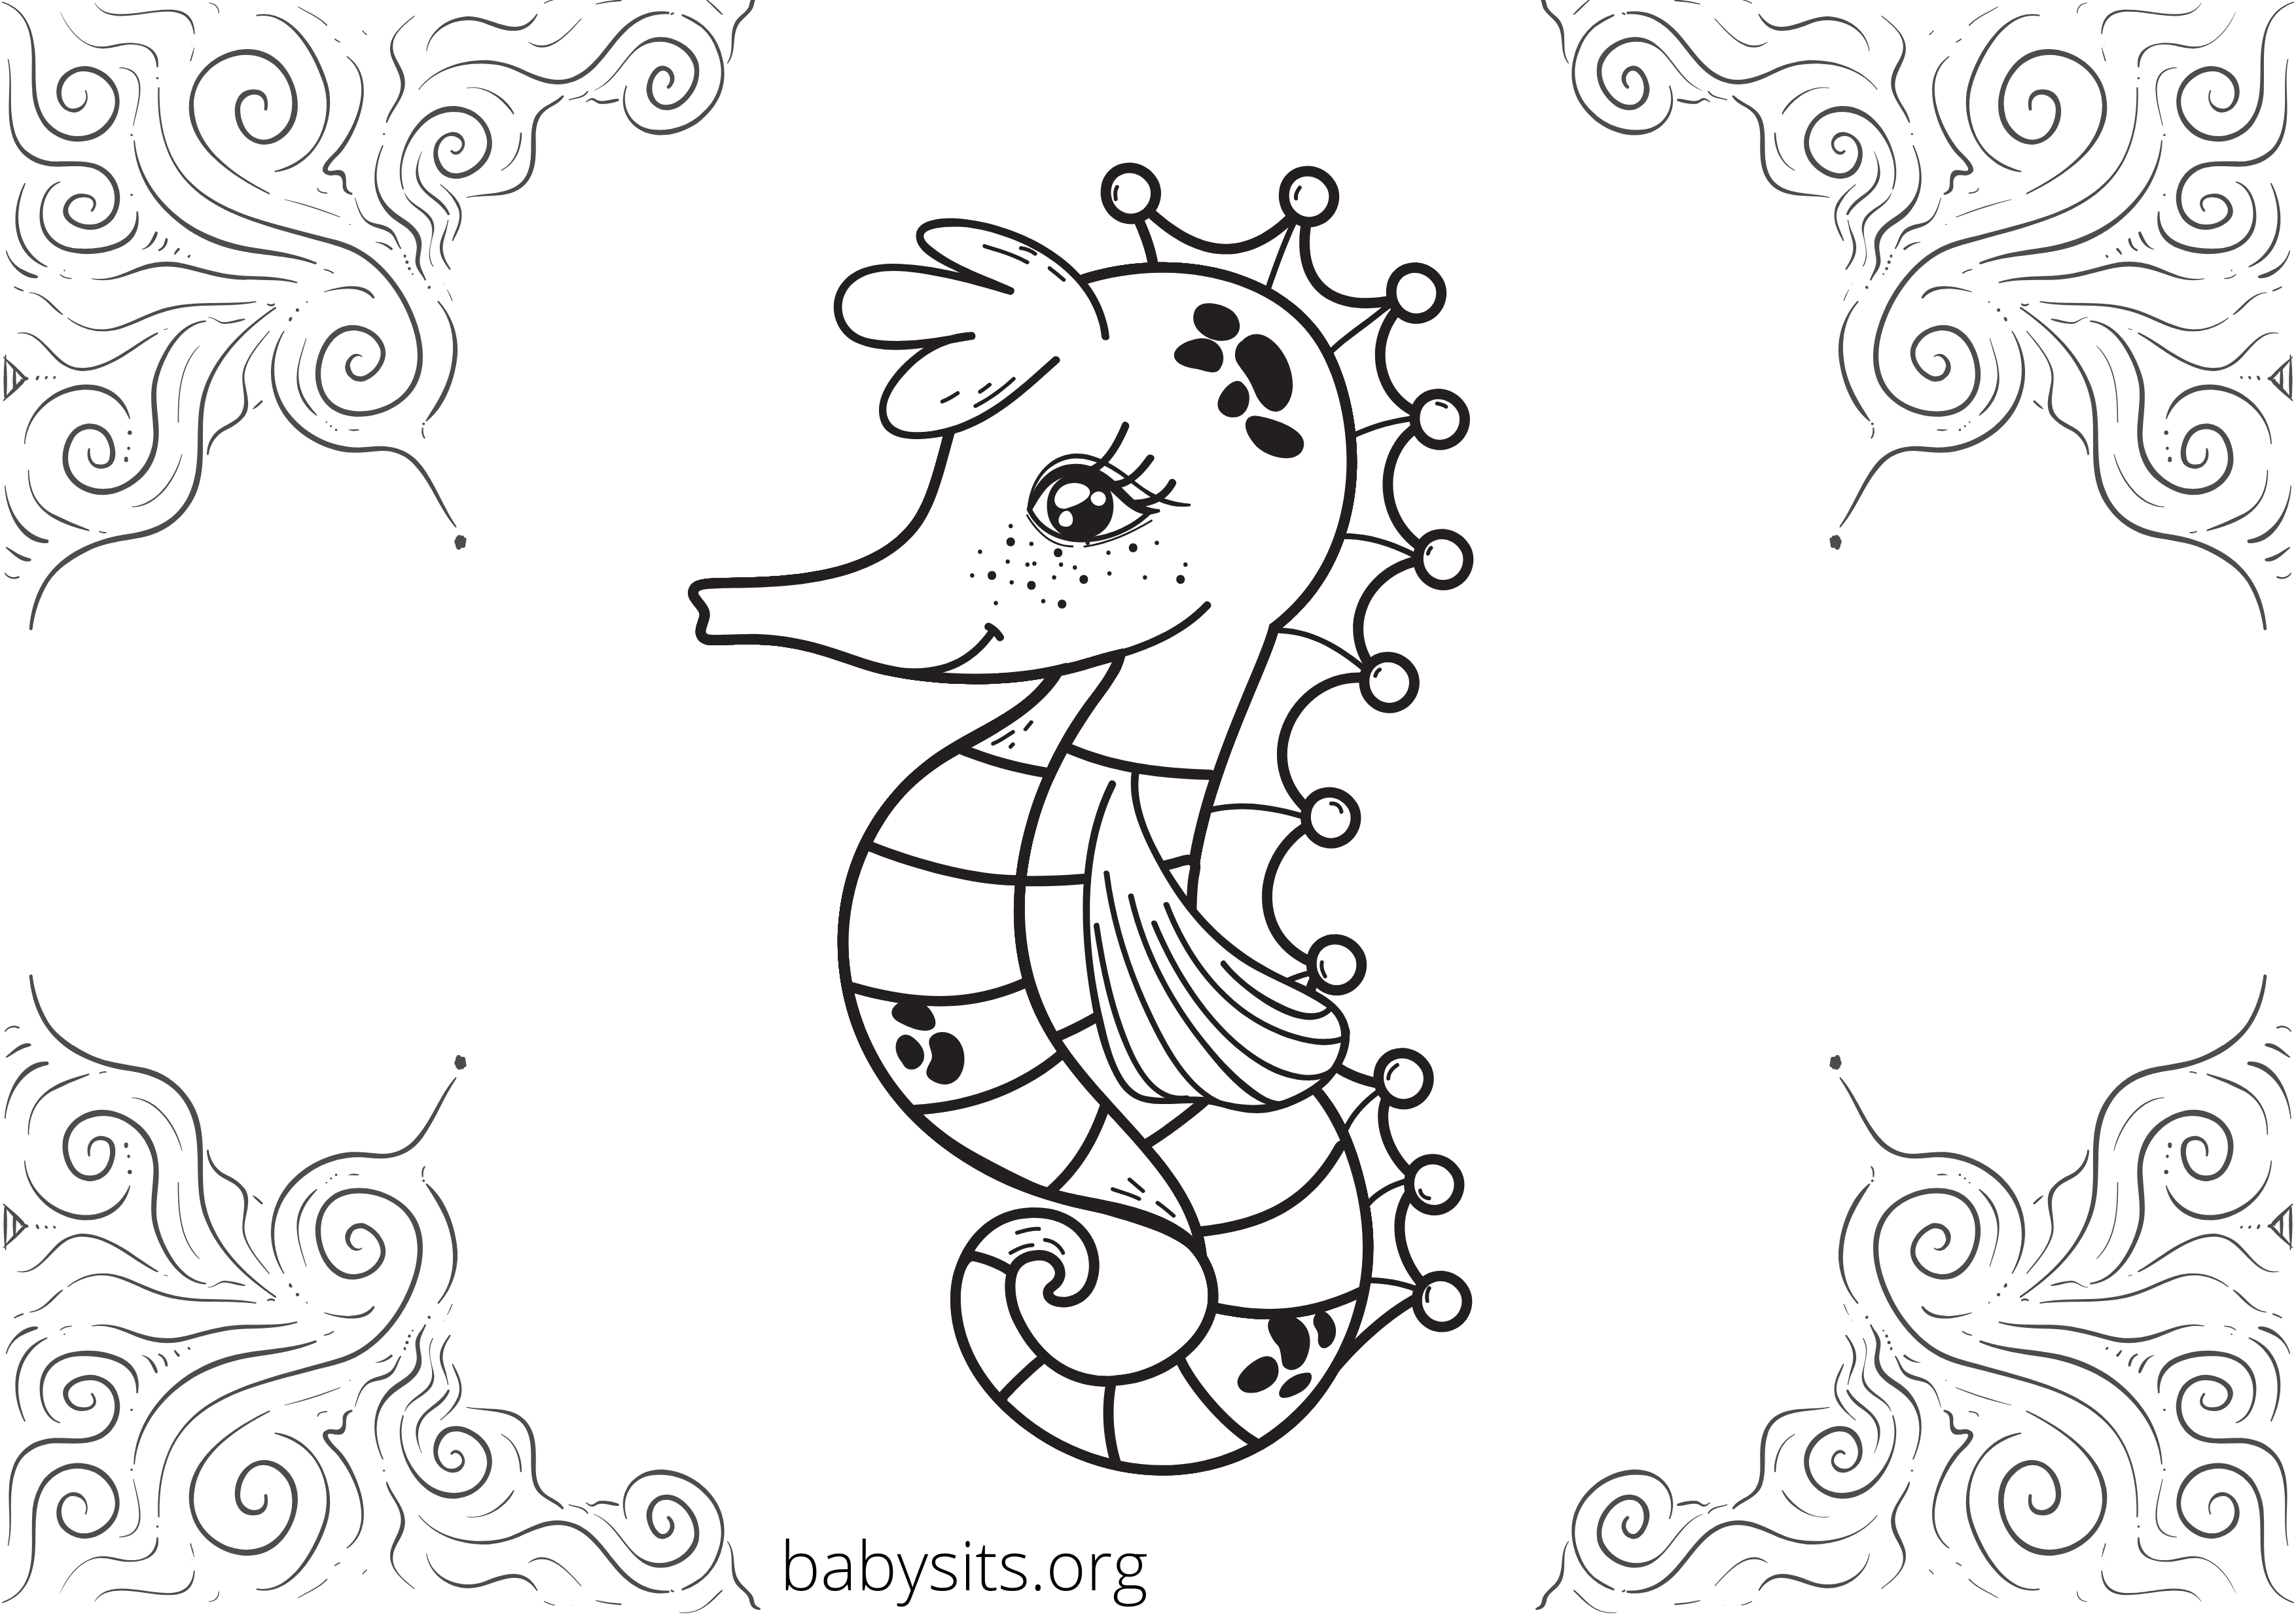 Free printable colouring pages of sea animals